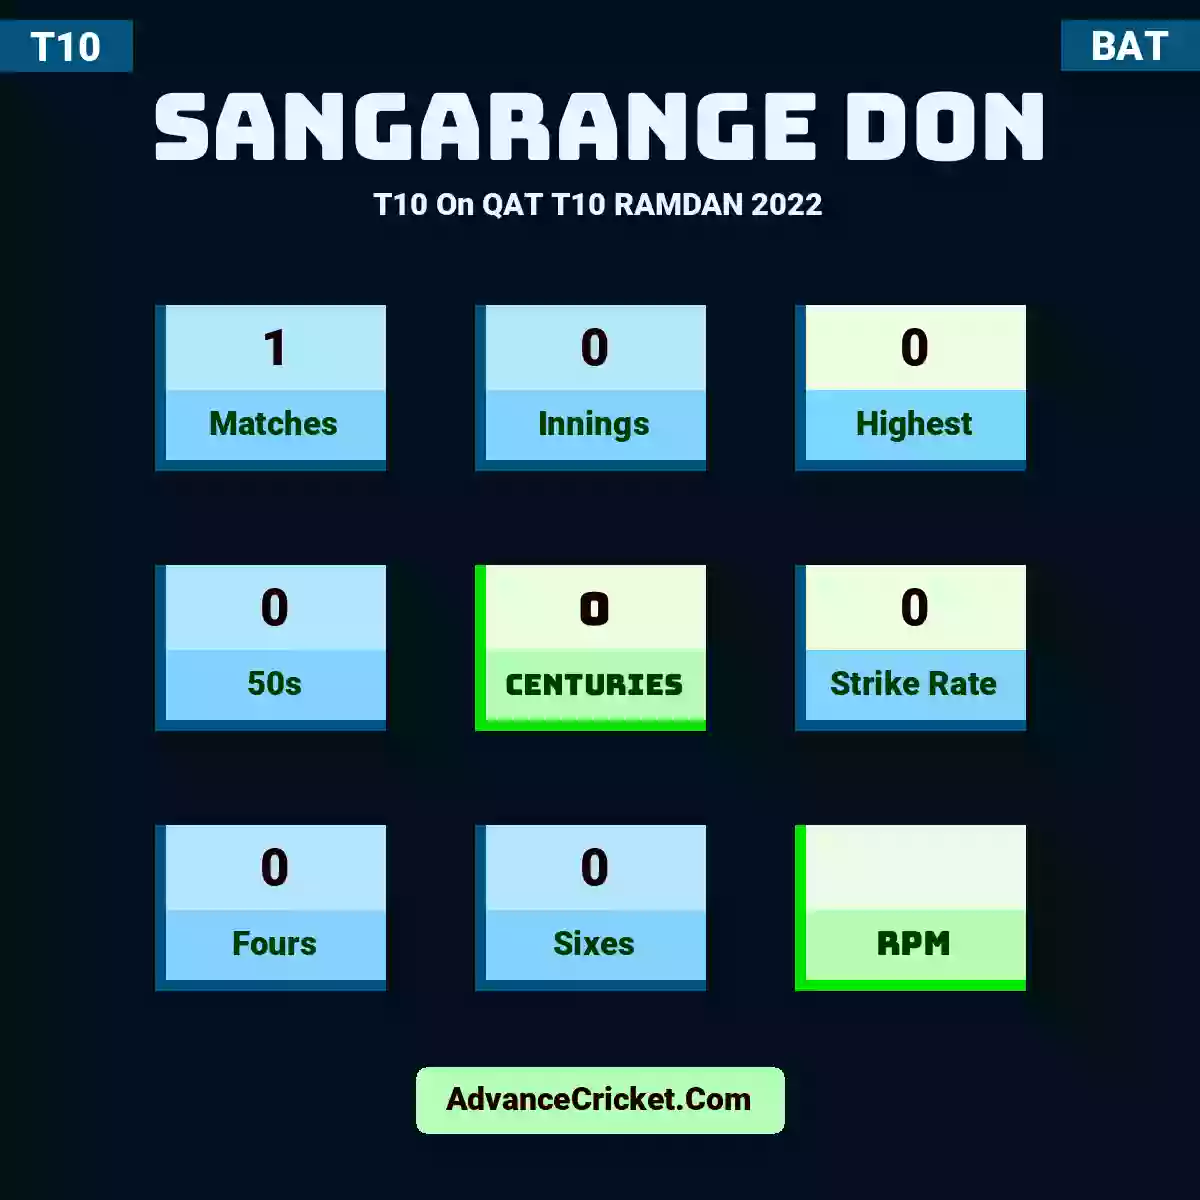 Sangarange Don T10  On QAT T10 RAMDAN 2022, Sangarange Don played 1 matches, scored 0 runs as highest, 0 half-centuries, and 0 centuries, with a strike rate of 0. S.Don hit 0 fours and 0 sixes.